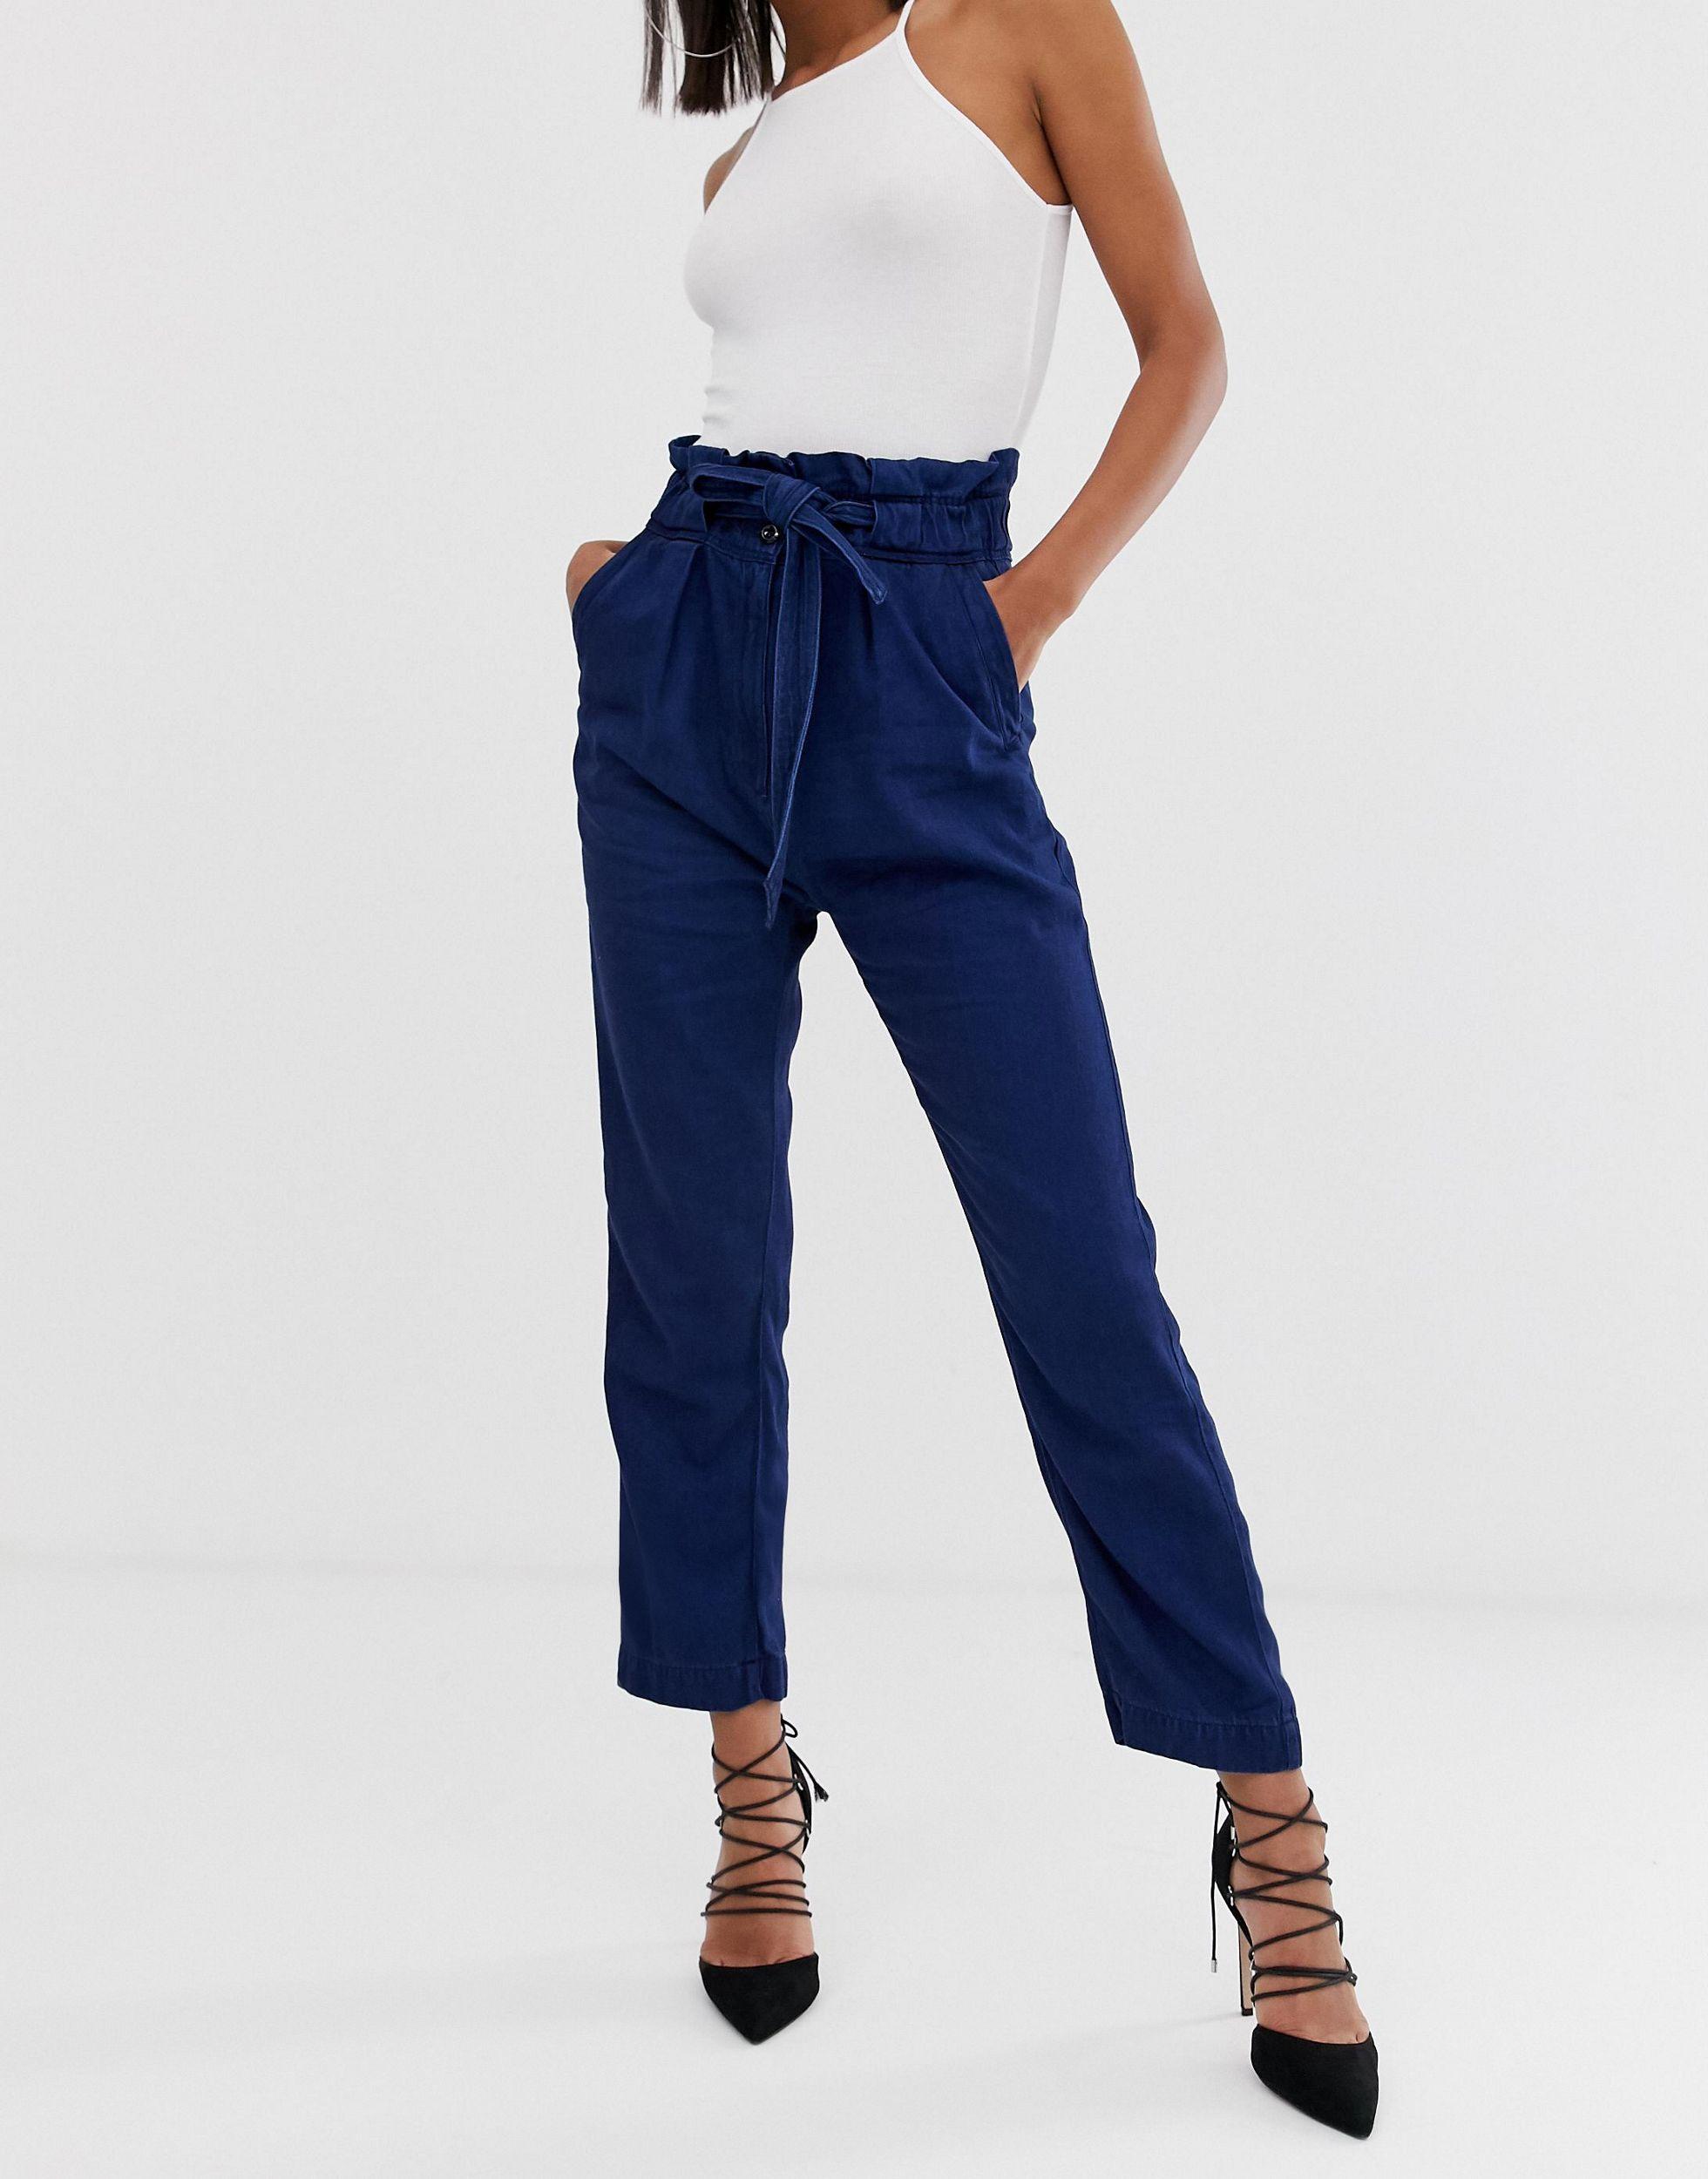 G-Star RAW Denim Bronson Paperbag Military Trousers in Blue - Lyst